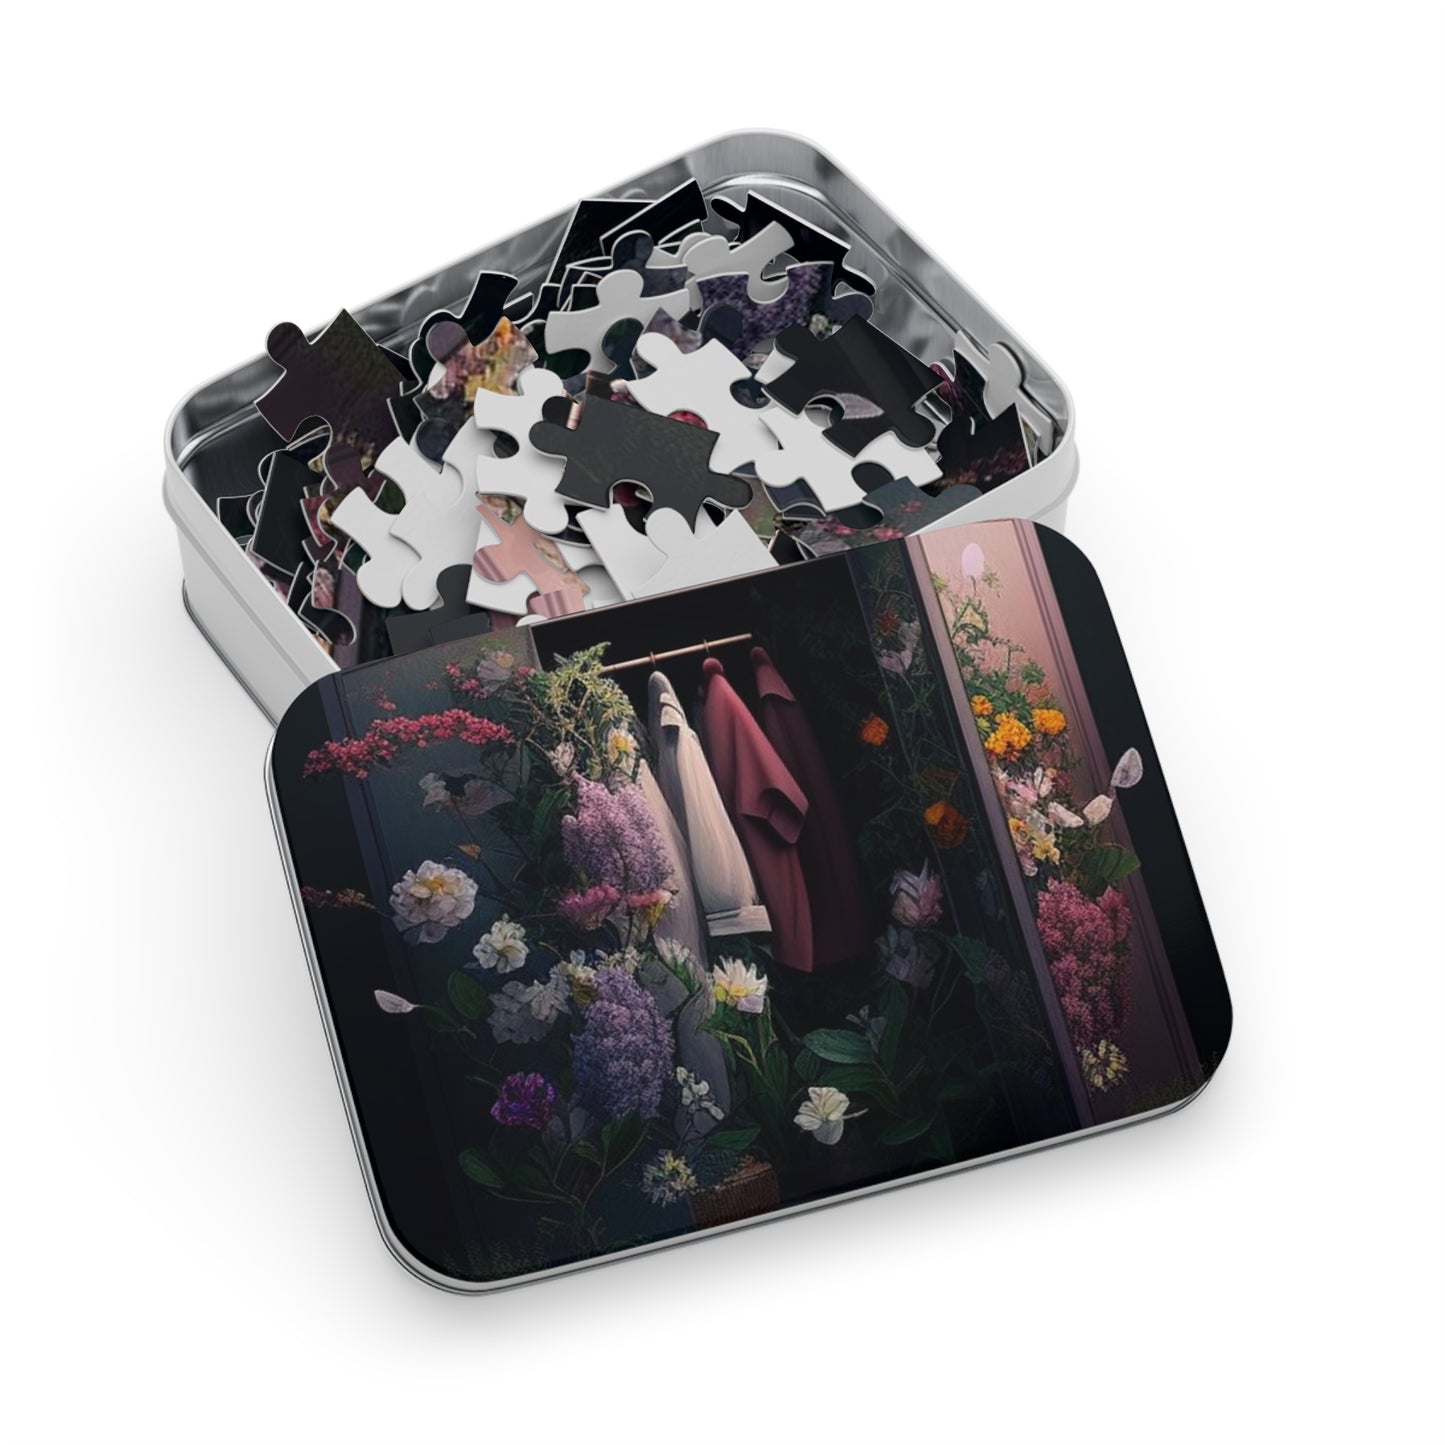 Jigsaw Puzzle (30, 110, 252, 500,1000-Piece) A Wardrobe Surrounded by Flowers 2